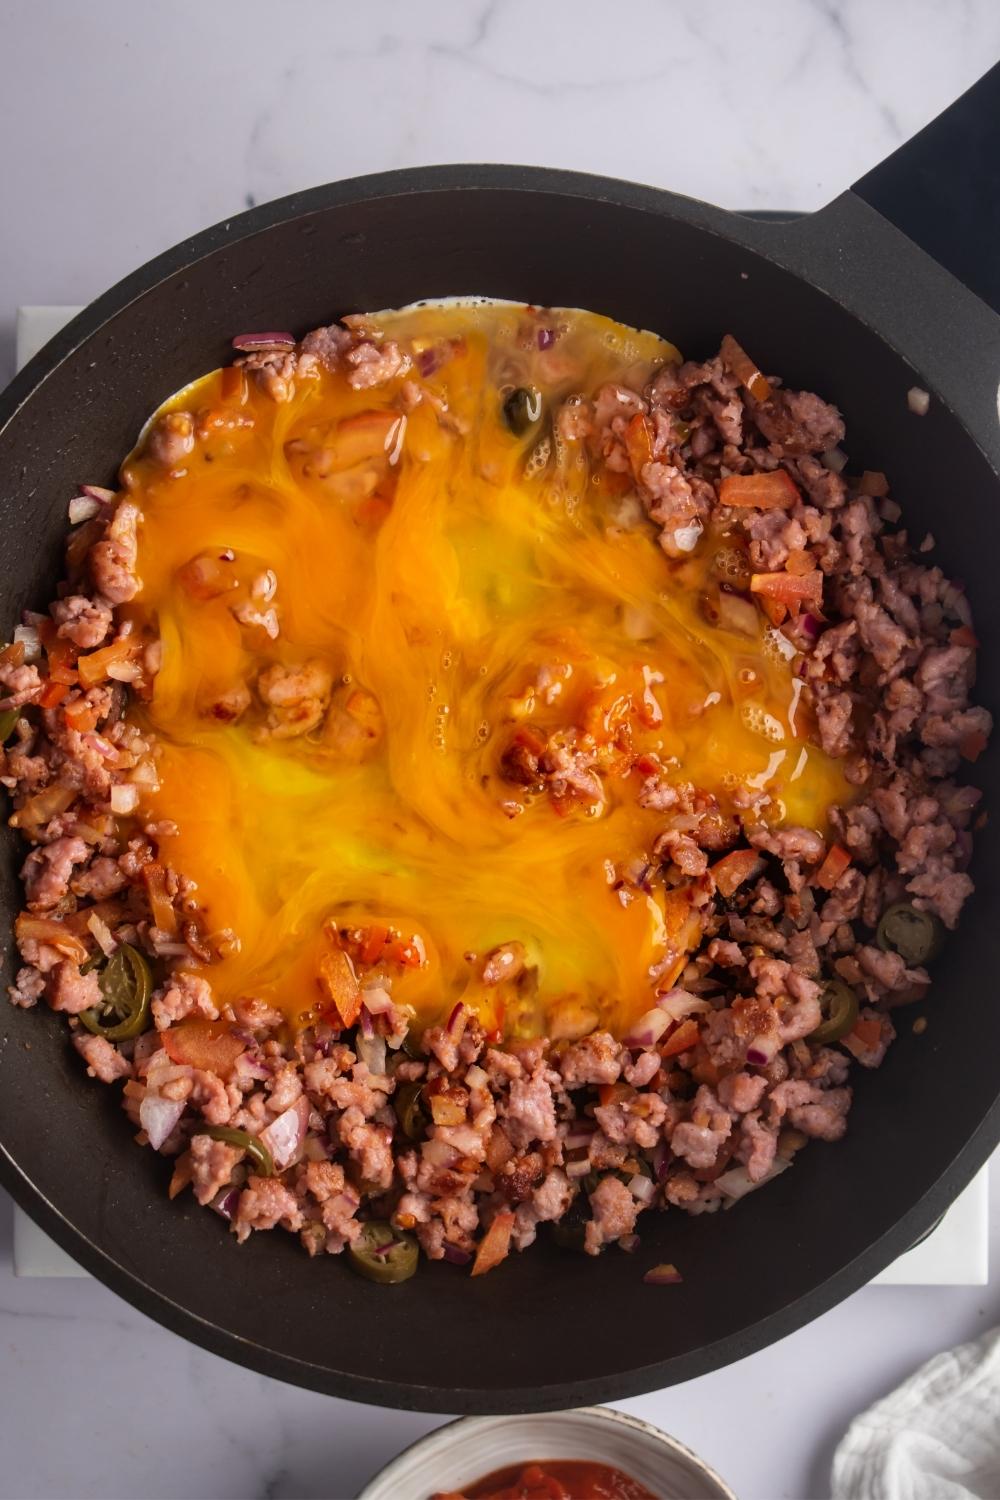 An egg on top of chopped onion, jalapenos, tomatoes, and ground beef in a skillet